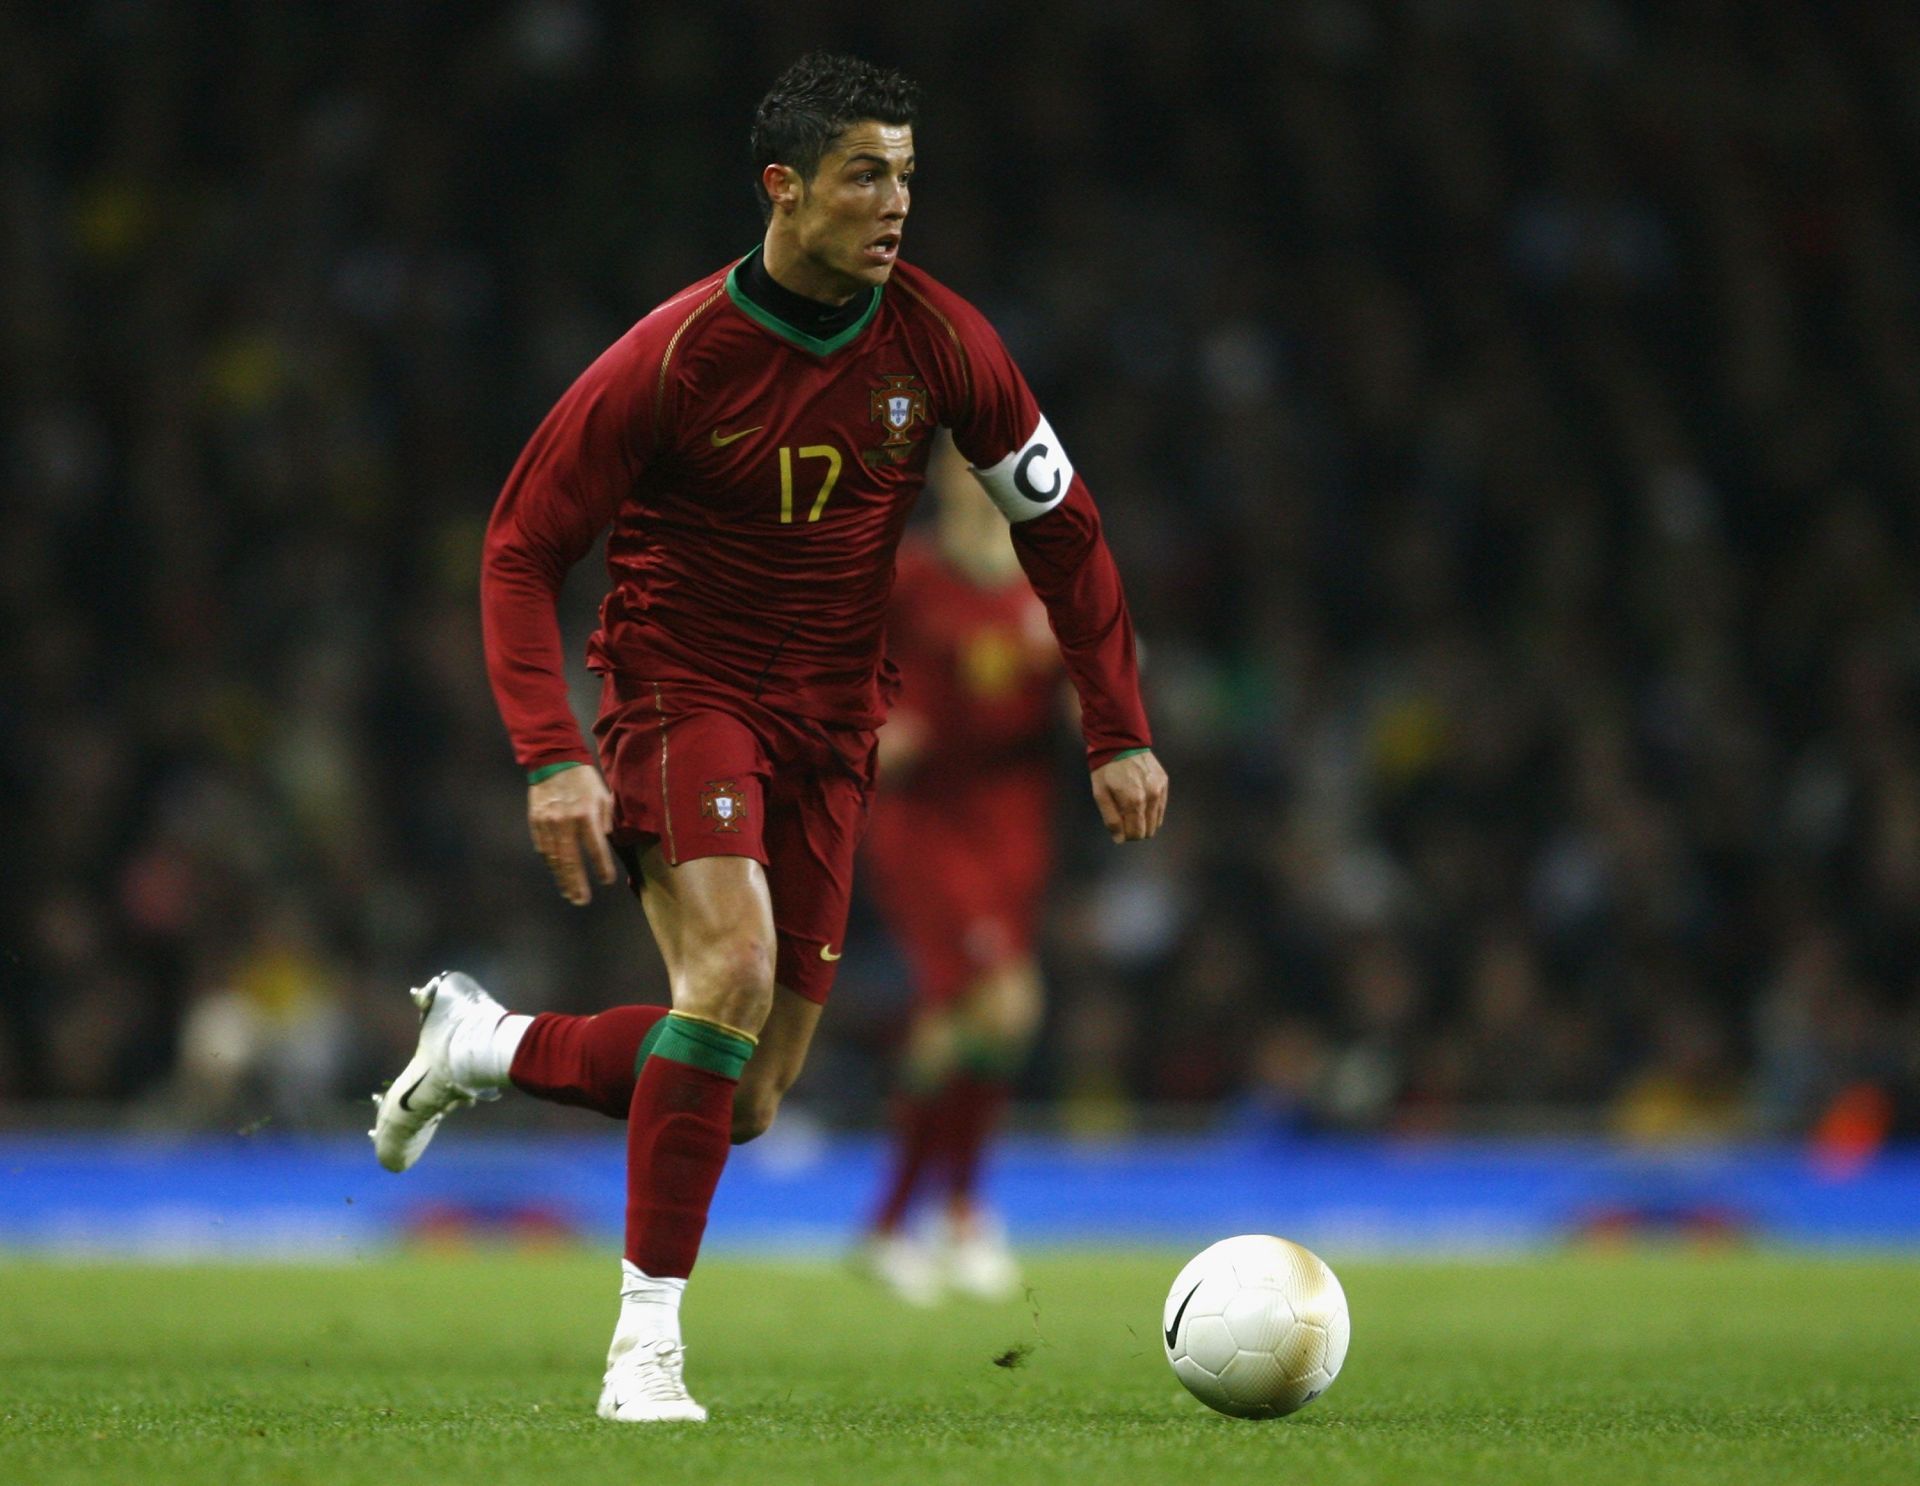 Ronaldo had a fine year with Portugal in 2006 by scoring six goals in total.